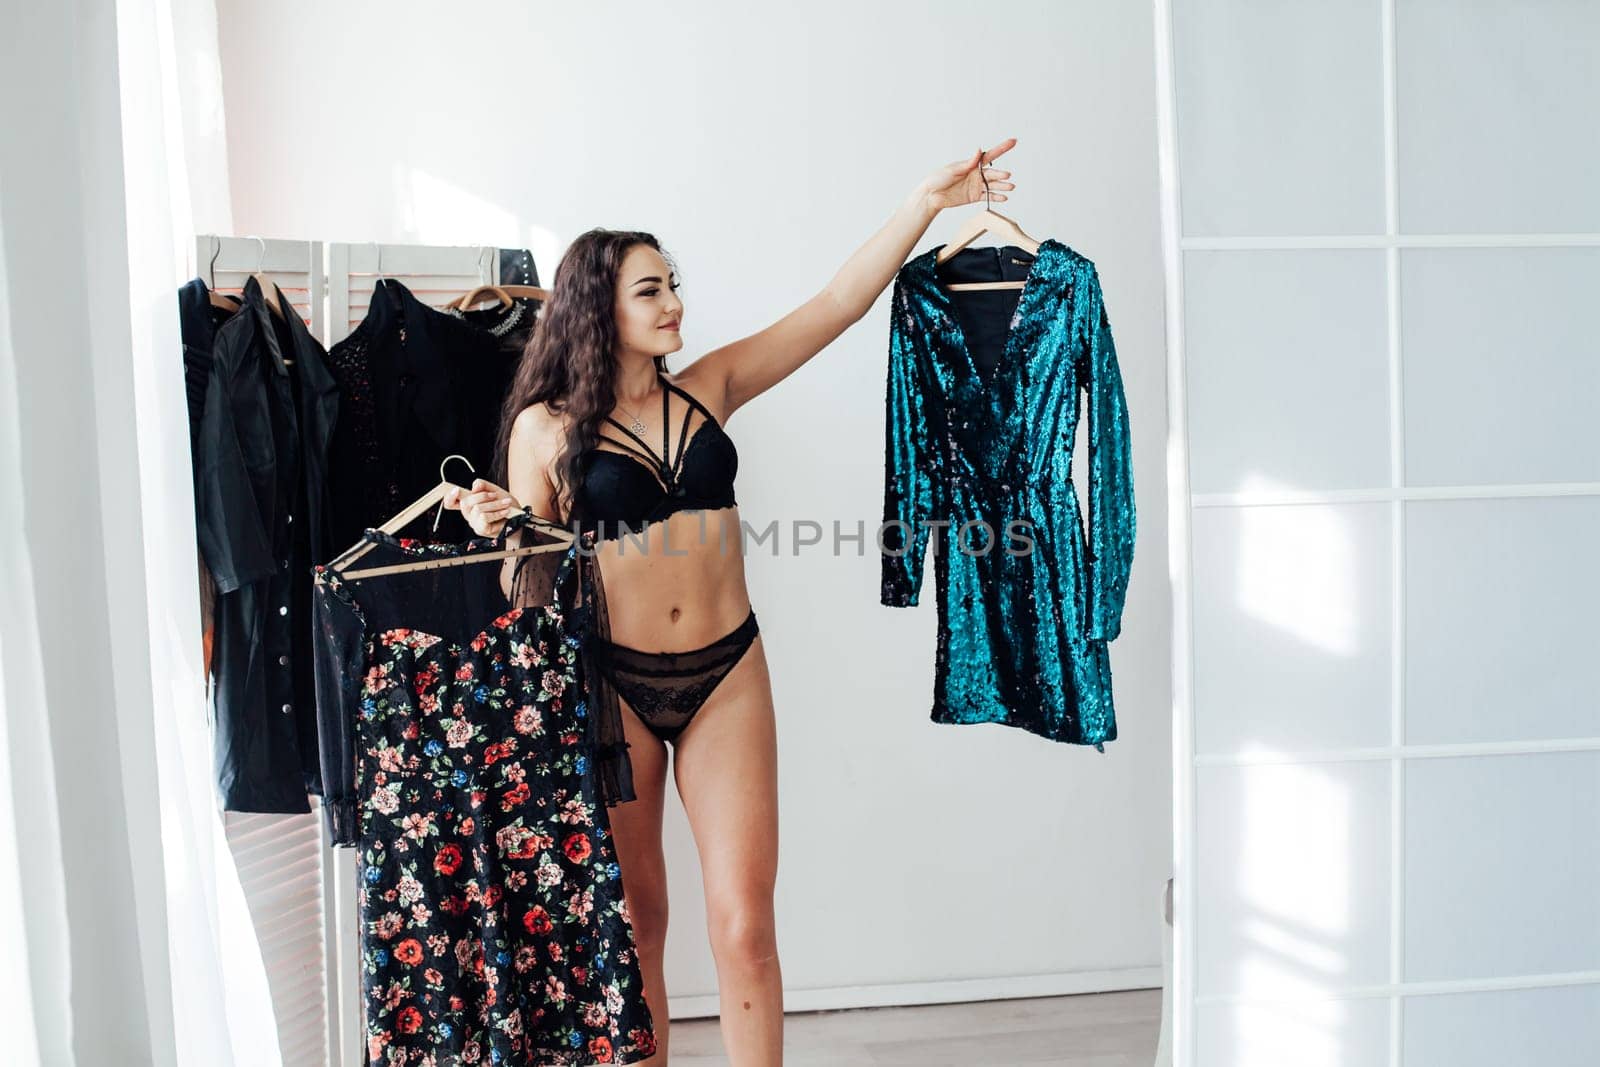 woman in black underwear stands with clothes in the wardrobe of a clothing store